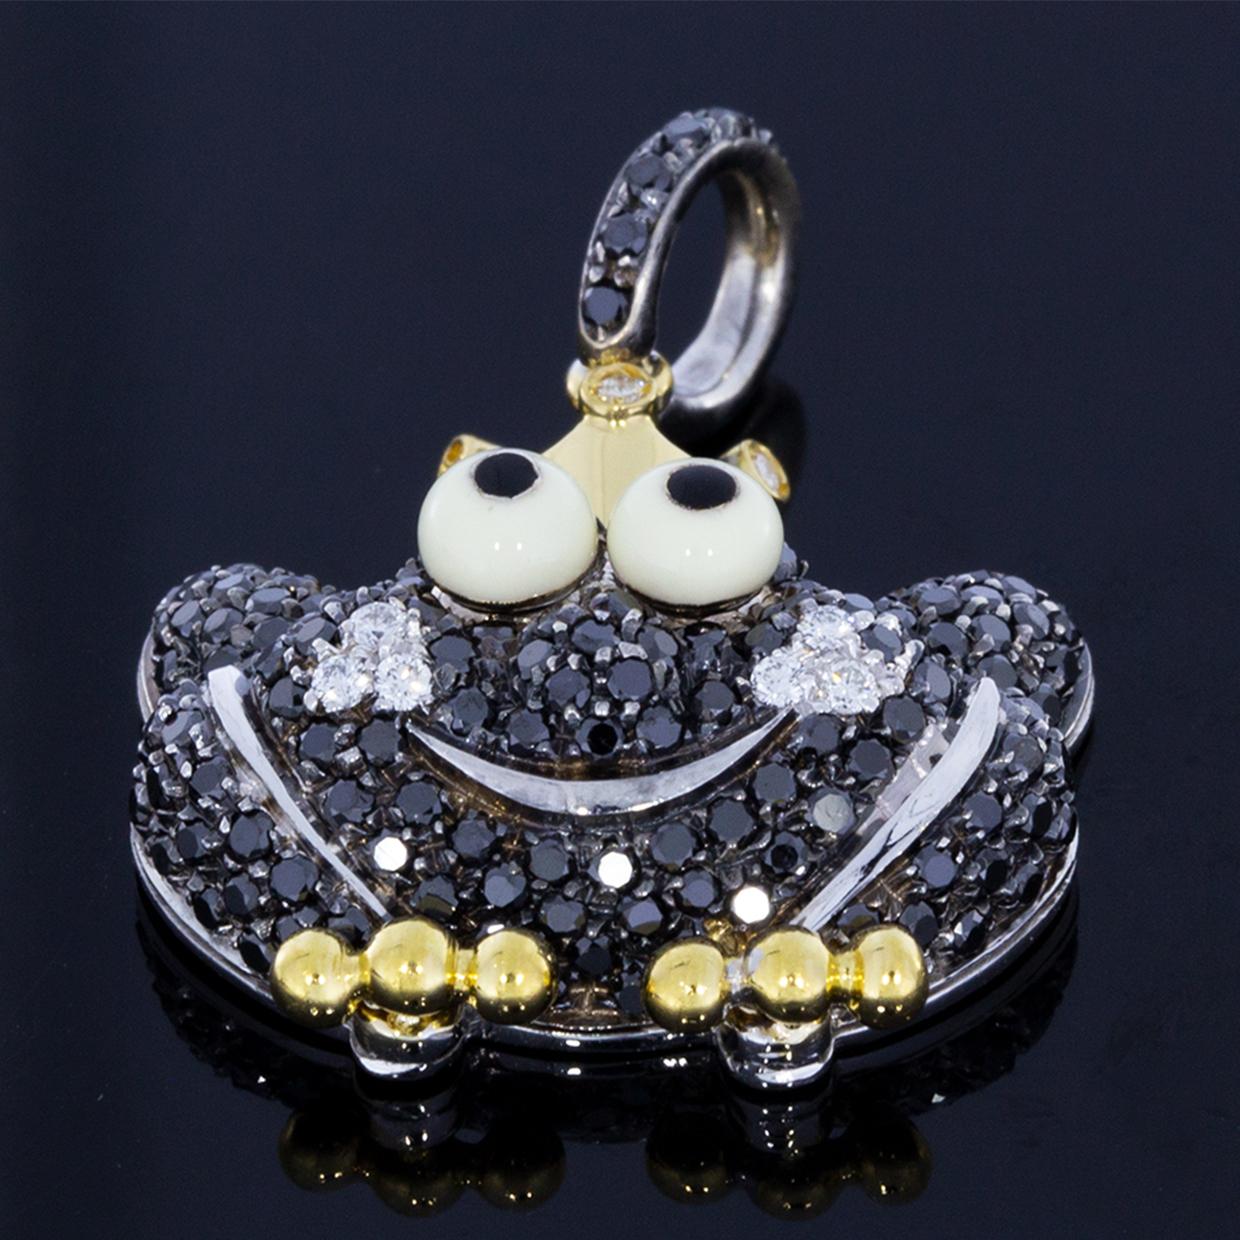 This limited edition Aaron Basha frog prince is definitely kissable! He is crafted in delectable 18kt yellow gold and adorned with scintillating black diamonds. Two swatches of stunning white diamonds form the cheeks of his bashful face while his